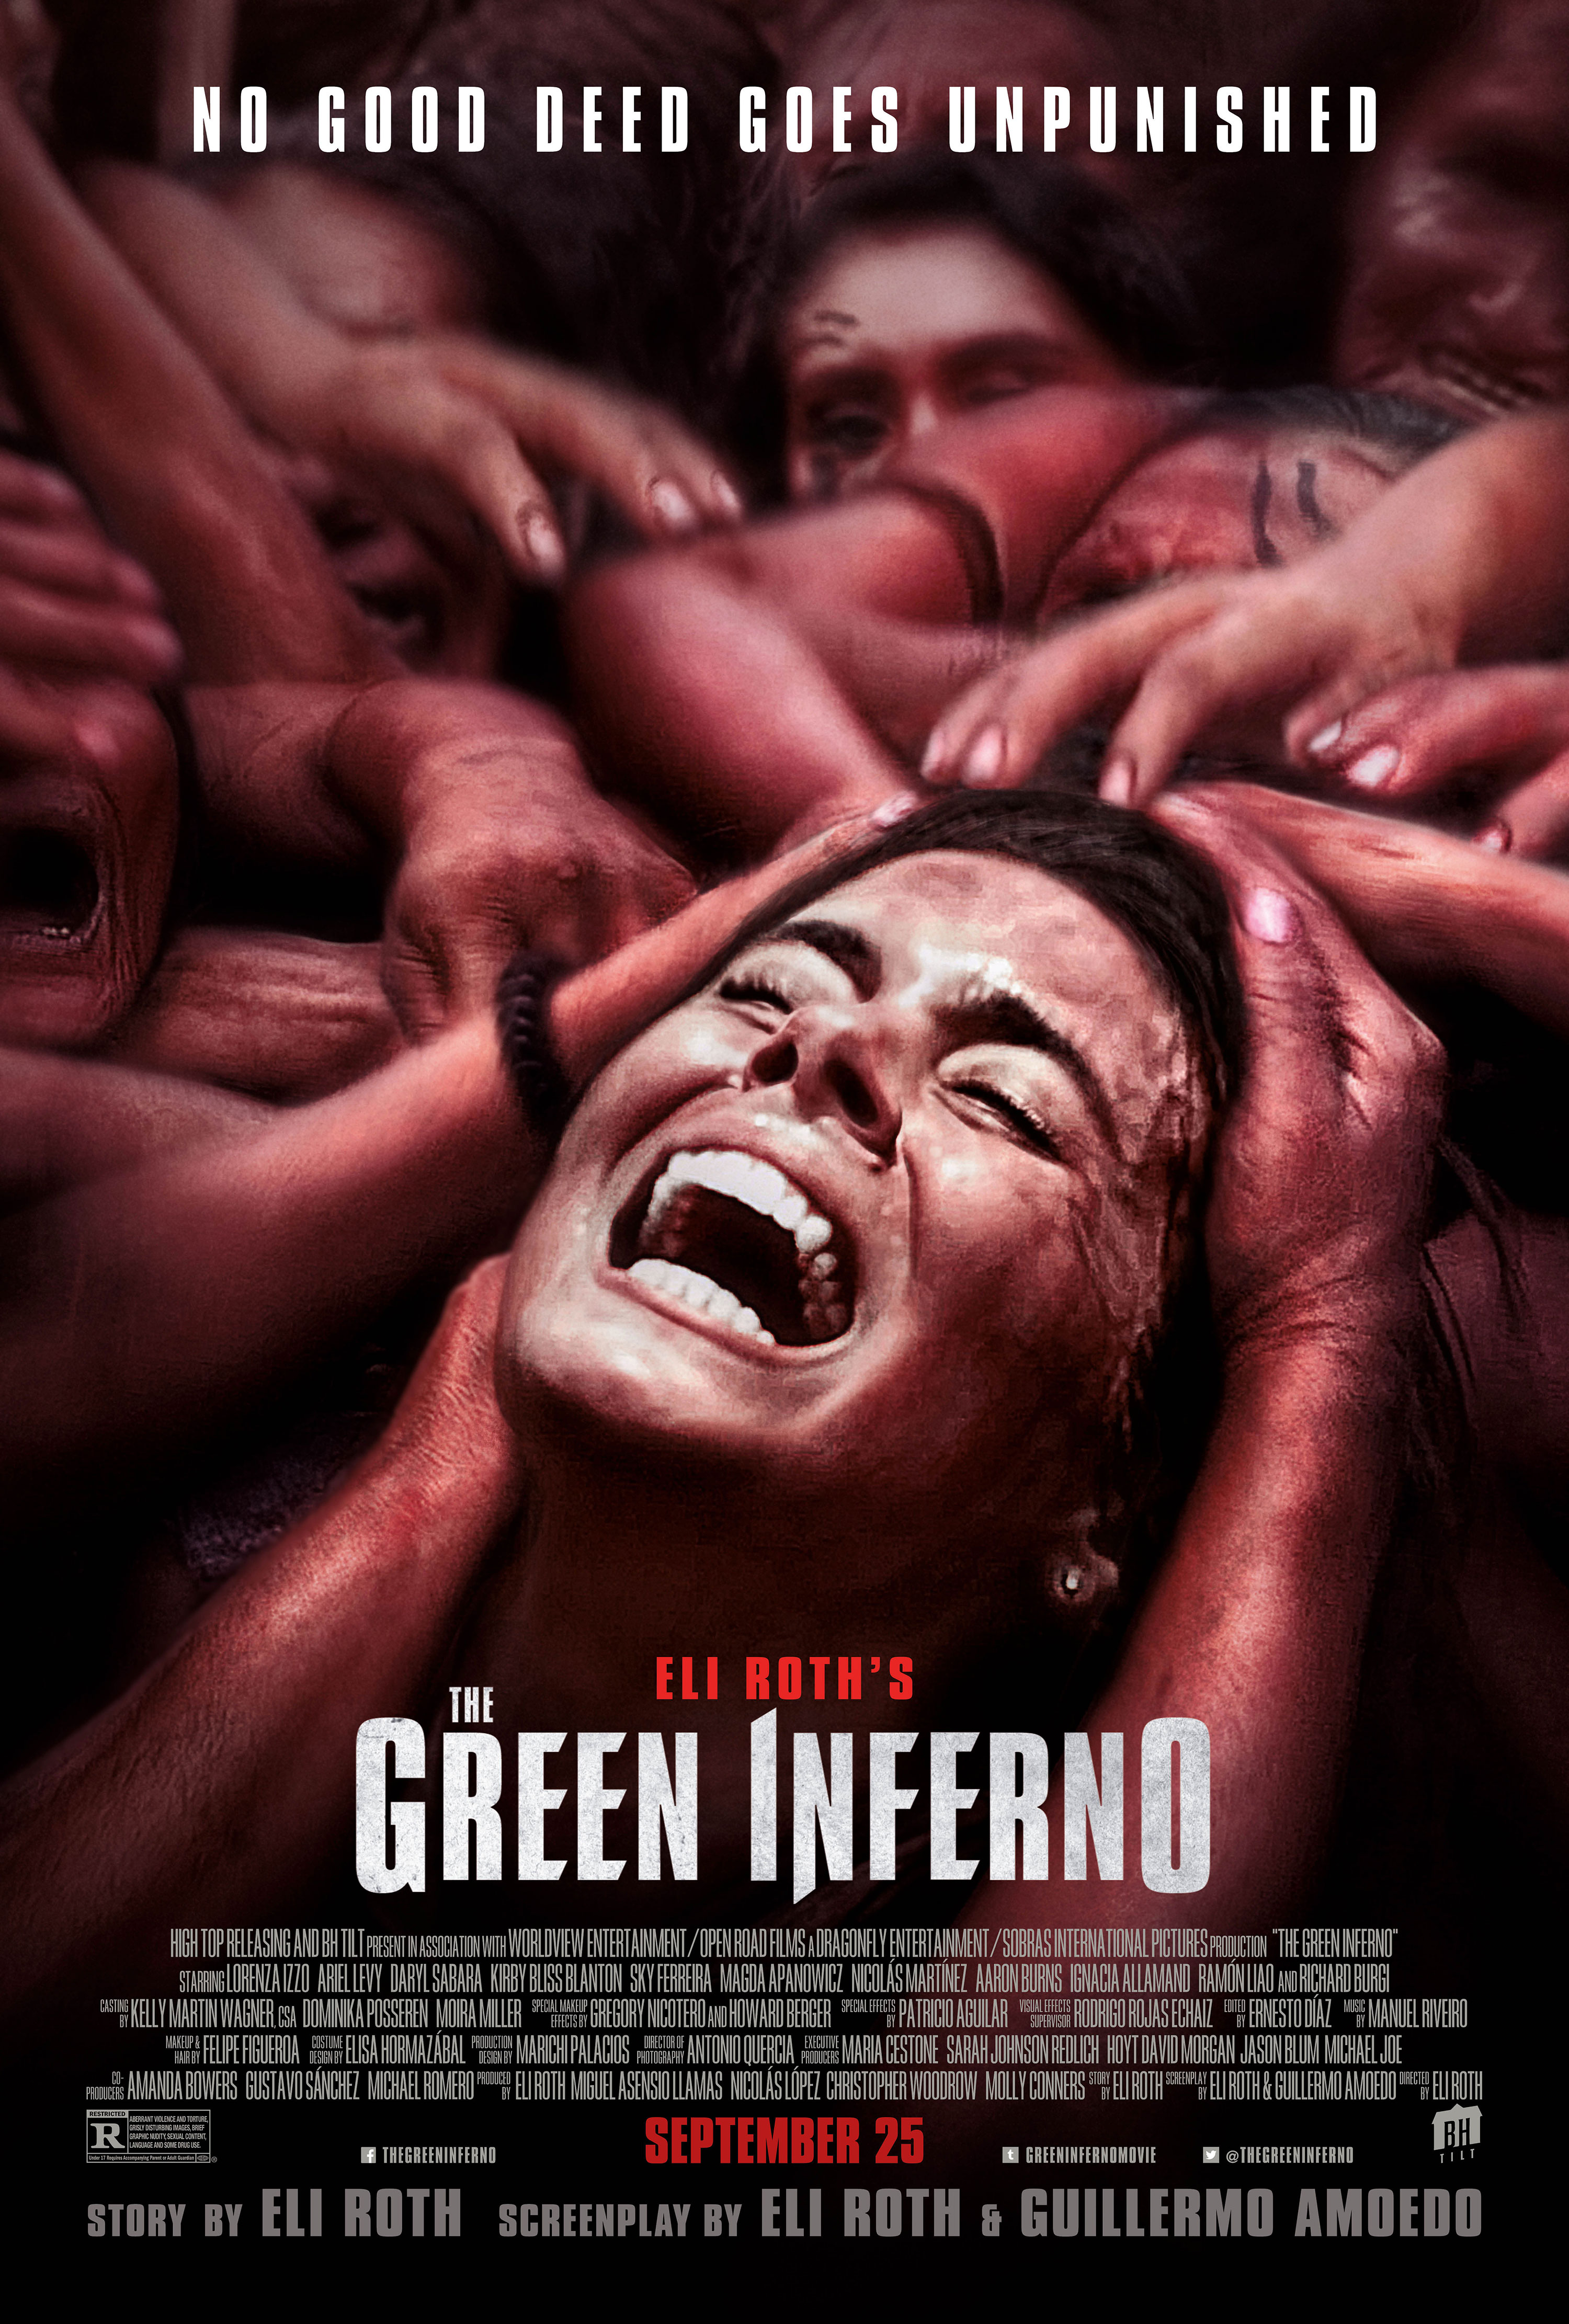 The Geen Inferno